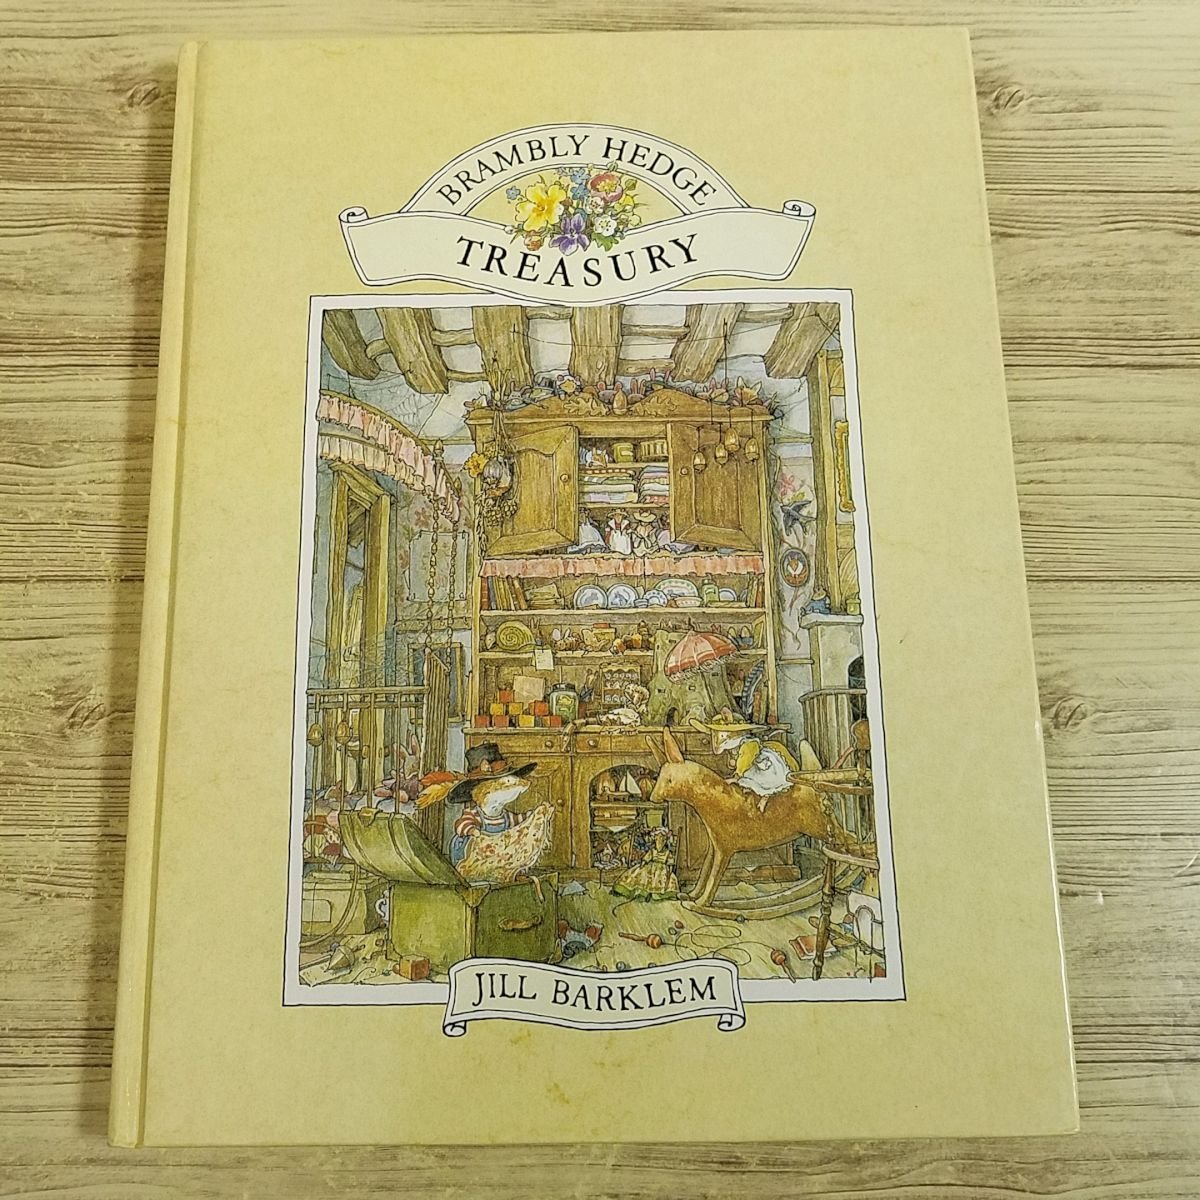  foreign language picture book [. ... .. thing ...BRAMBLY HEDGE TRESURY] secret. ....+ Will Fred. .. nobori + explanation foreign book Jill * Burke Lem 